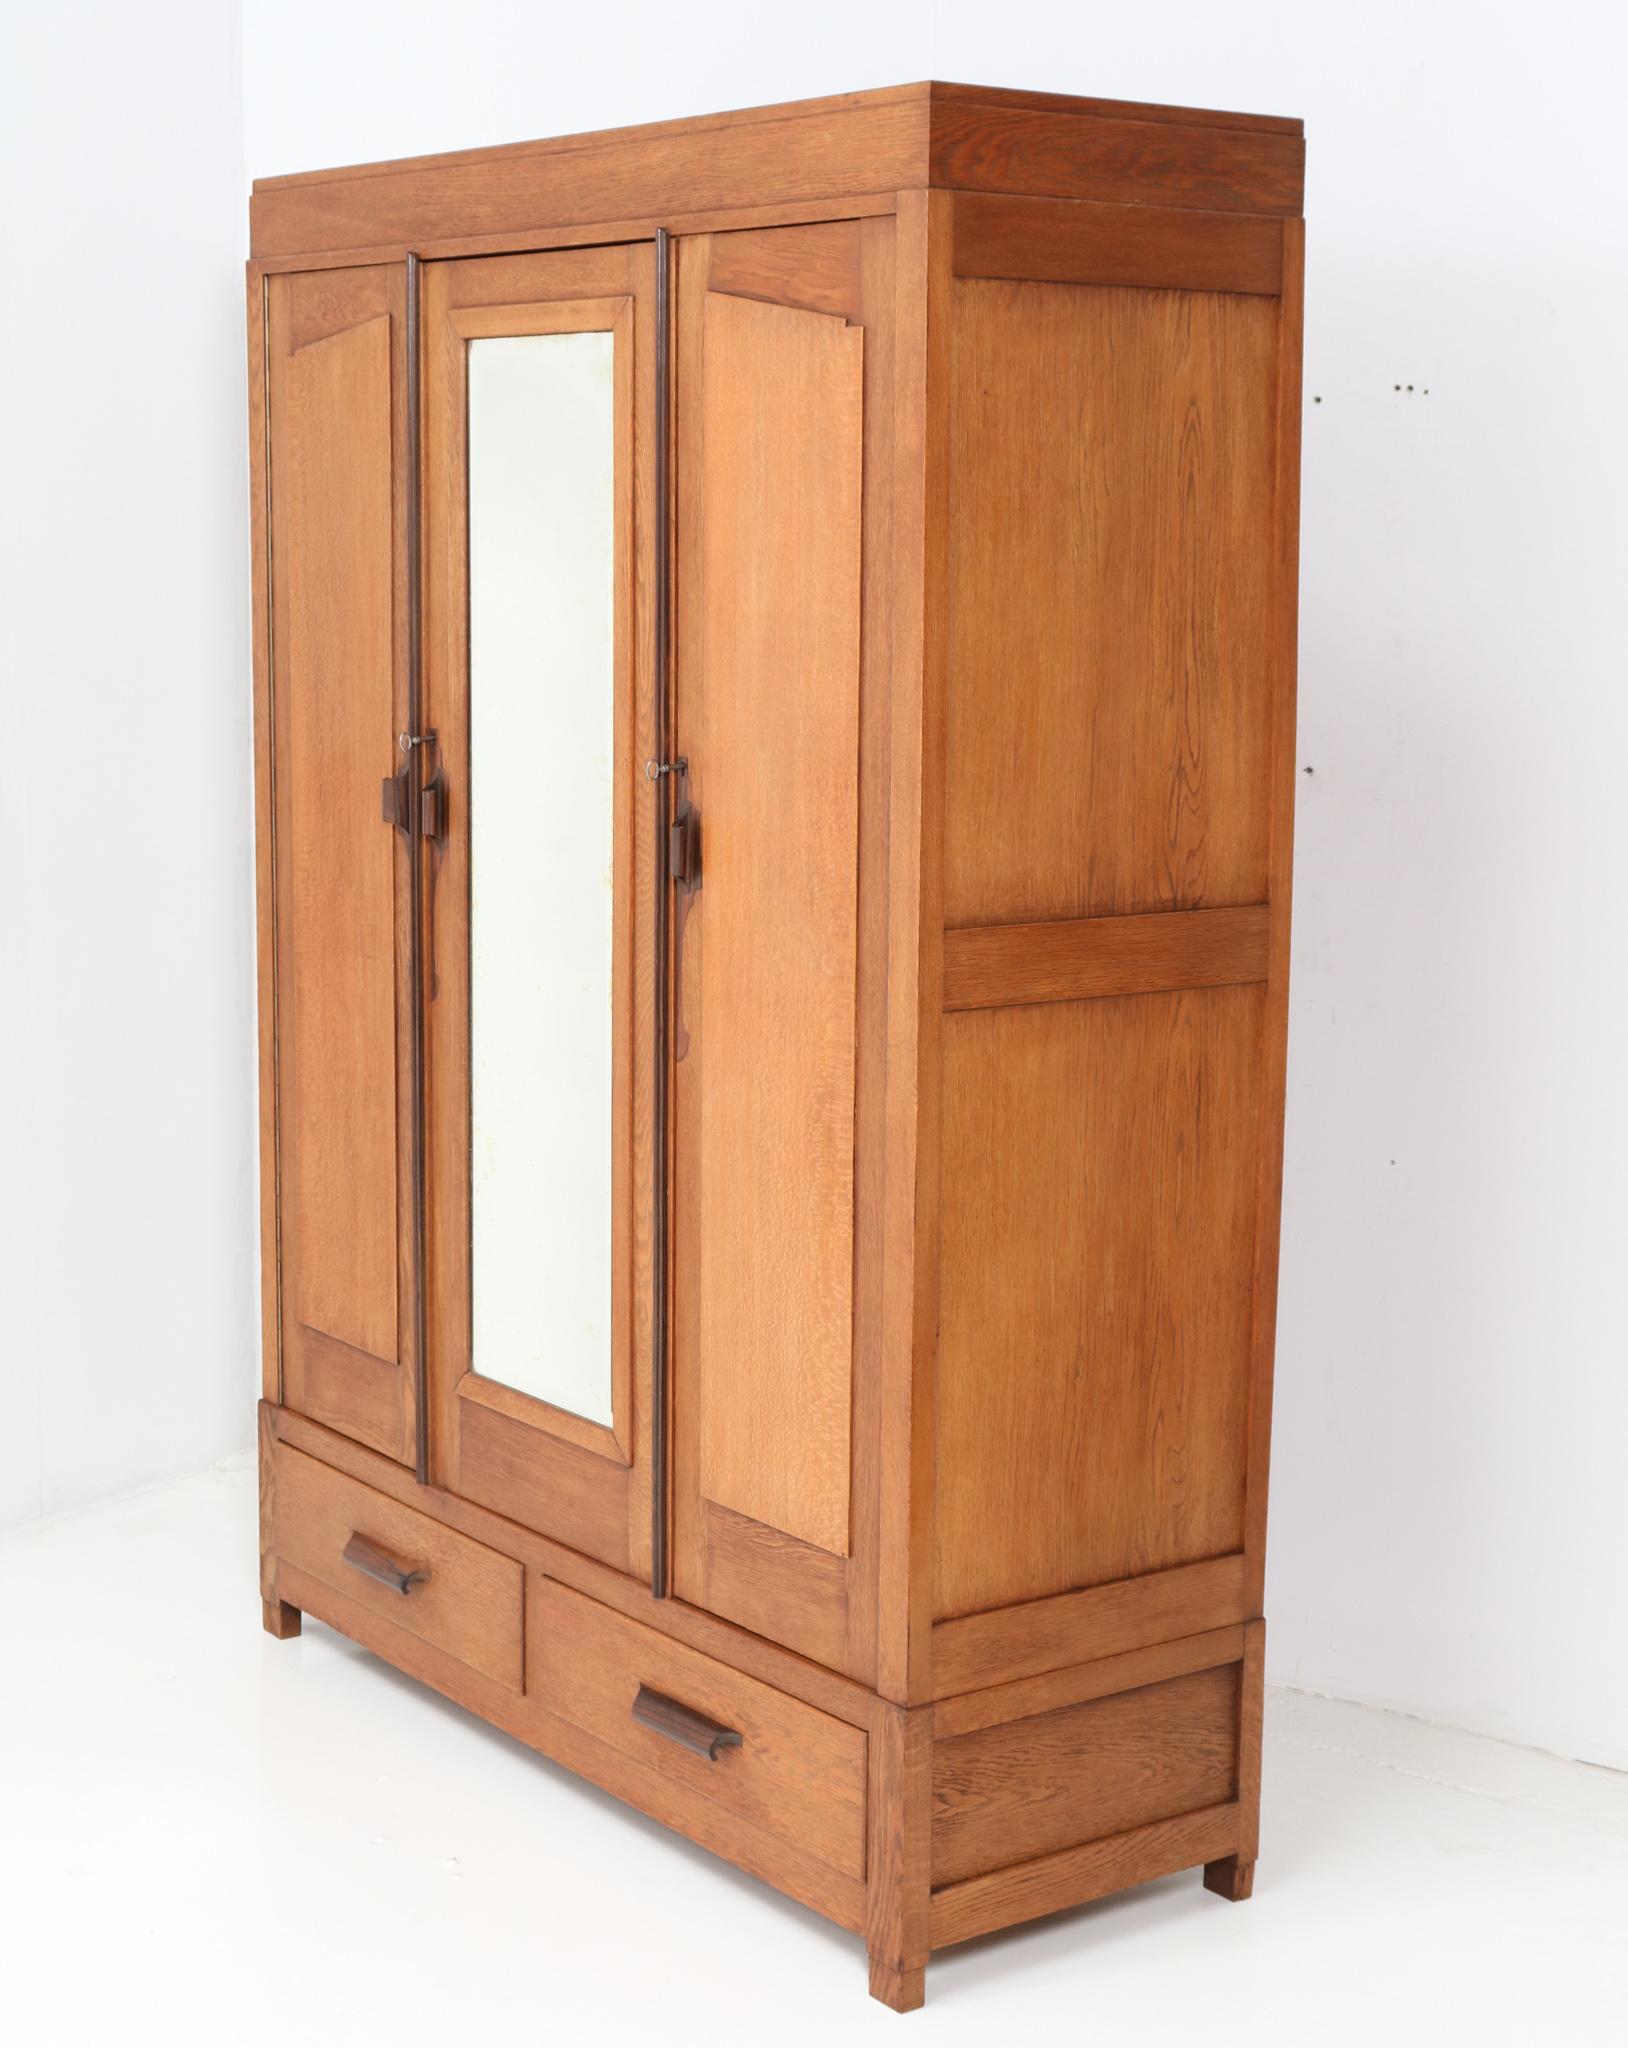 Stunning and rare Art Deco Amsterdamse School armoire or wardrobe.
Striking Dutch design from the 1920s.
Solid oak and original oak veneer base with original solid macassar handles.
The left door and the right door are made out of solid oak with